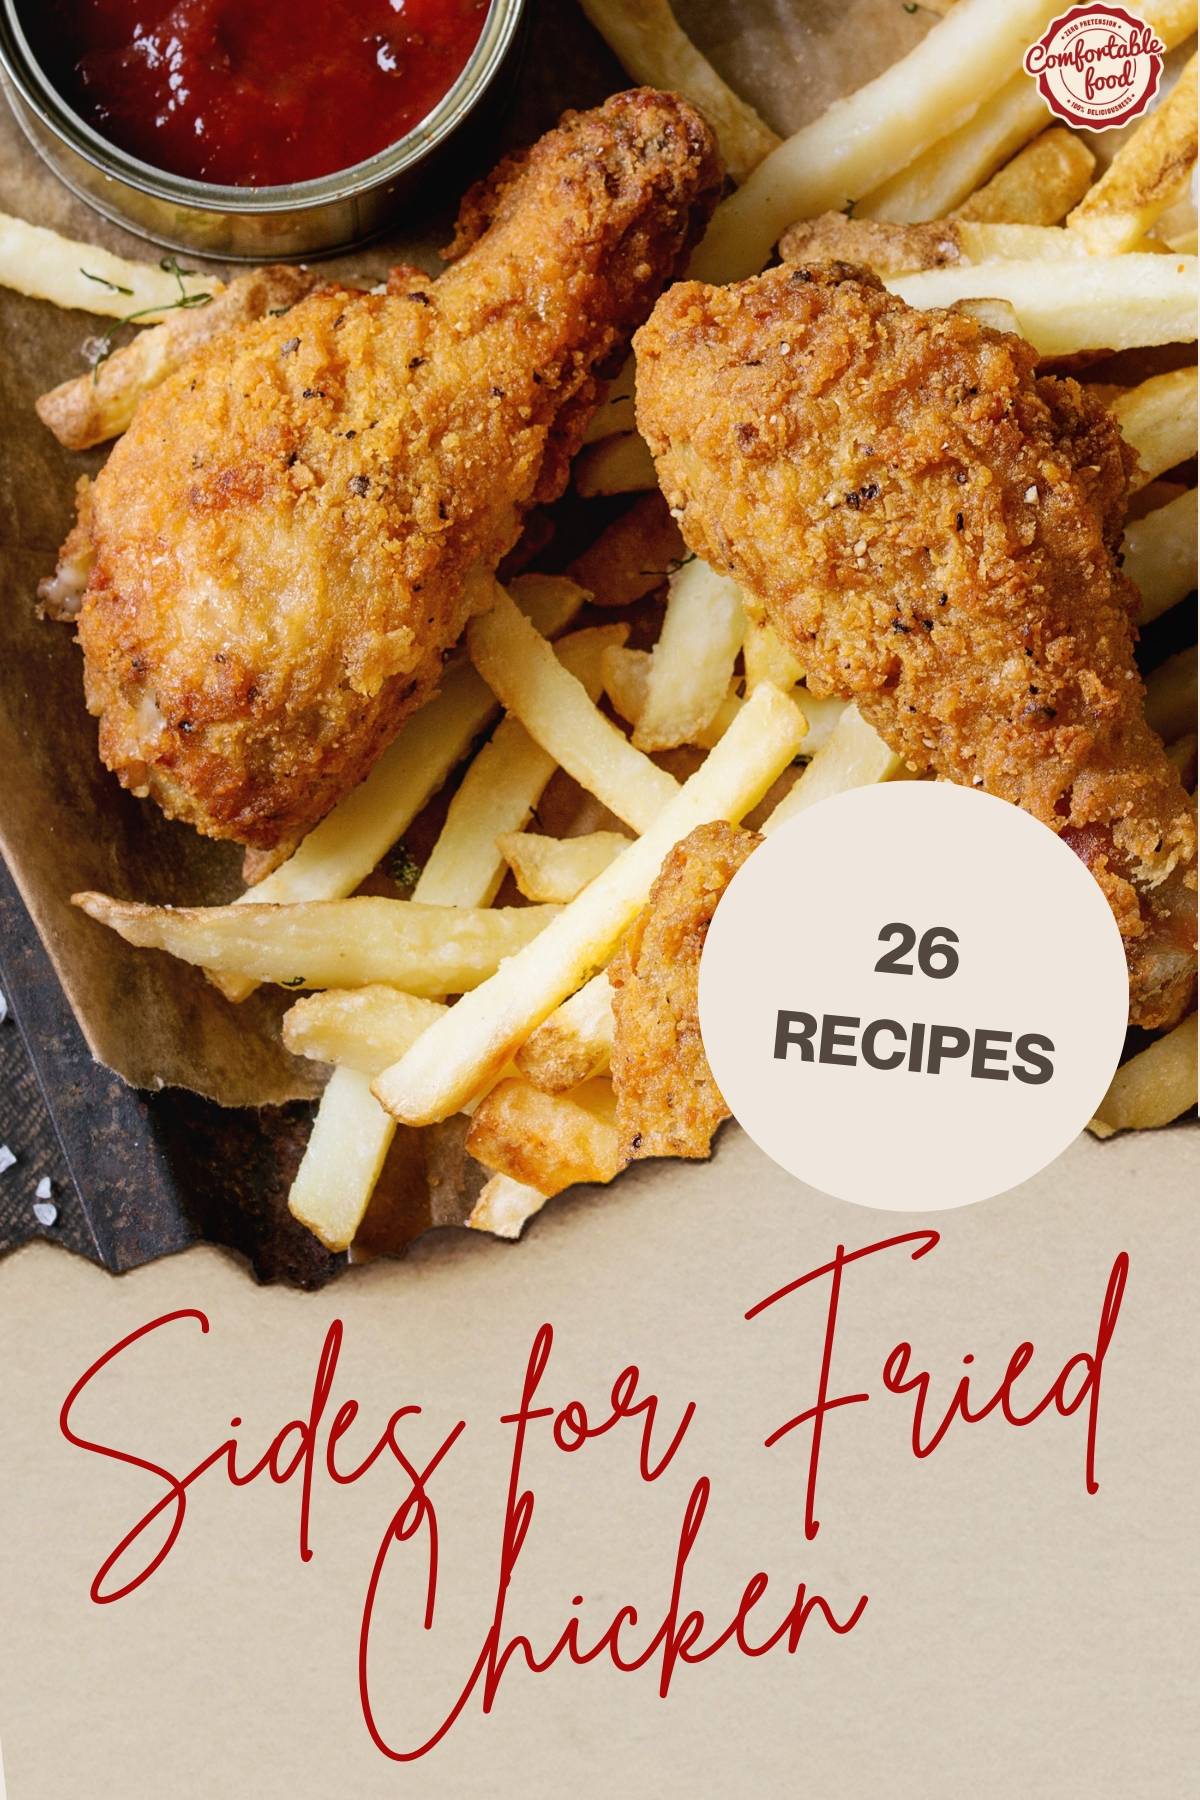 Sides for fried chicken -socials